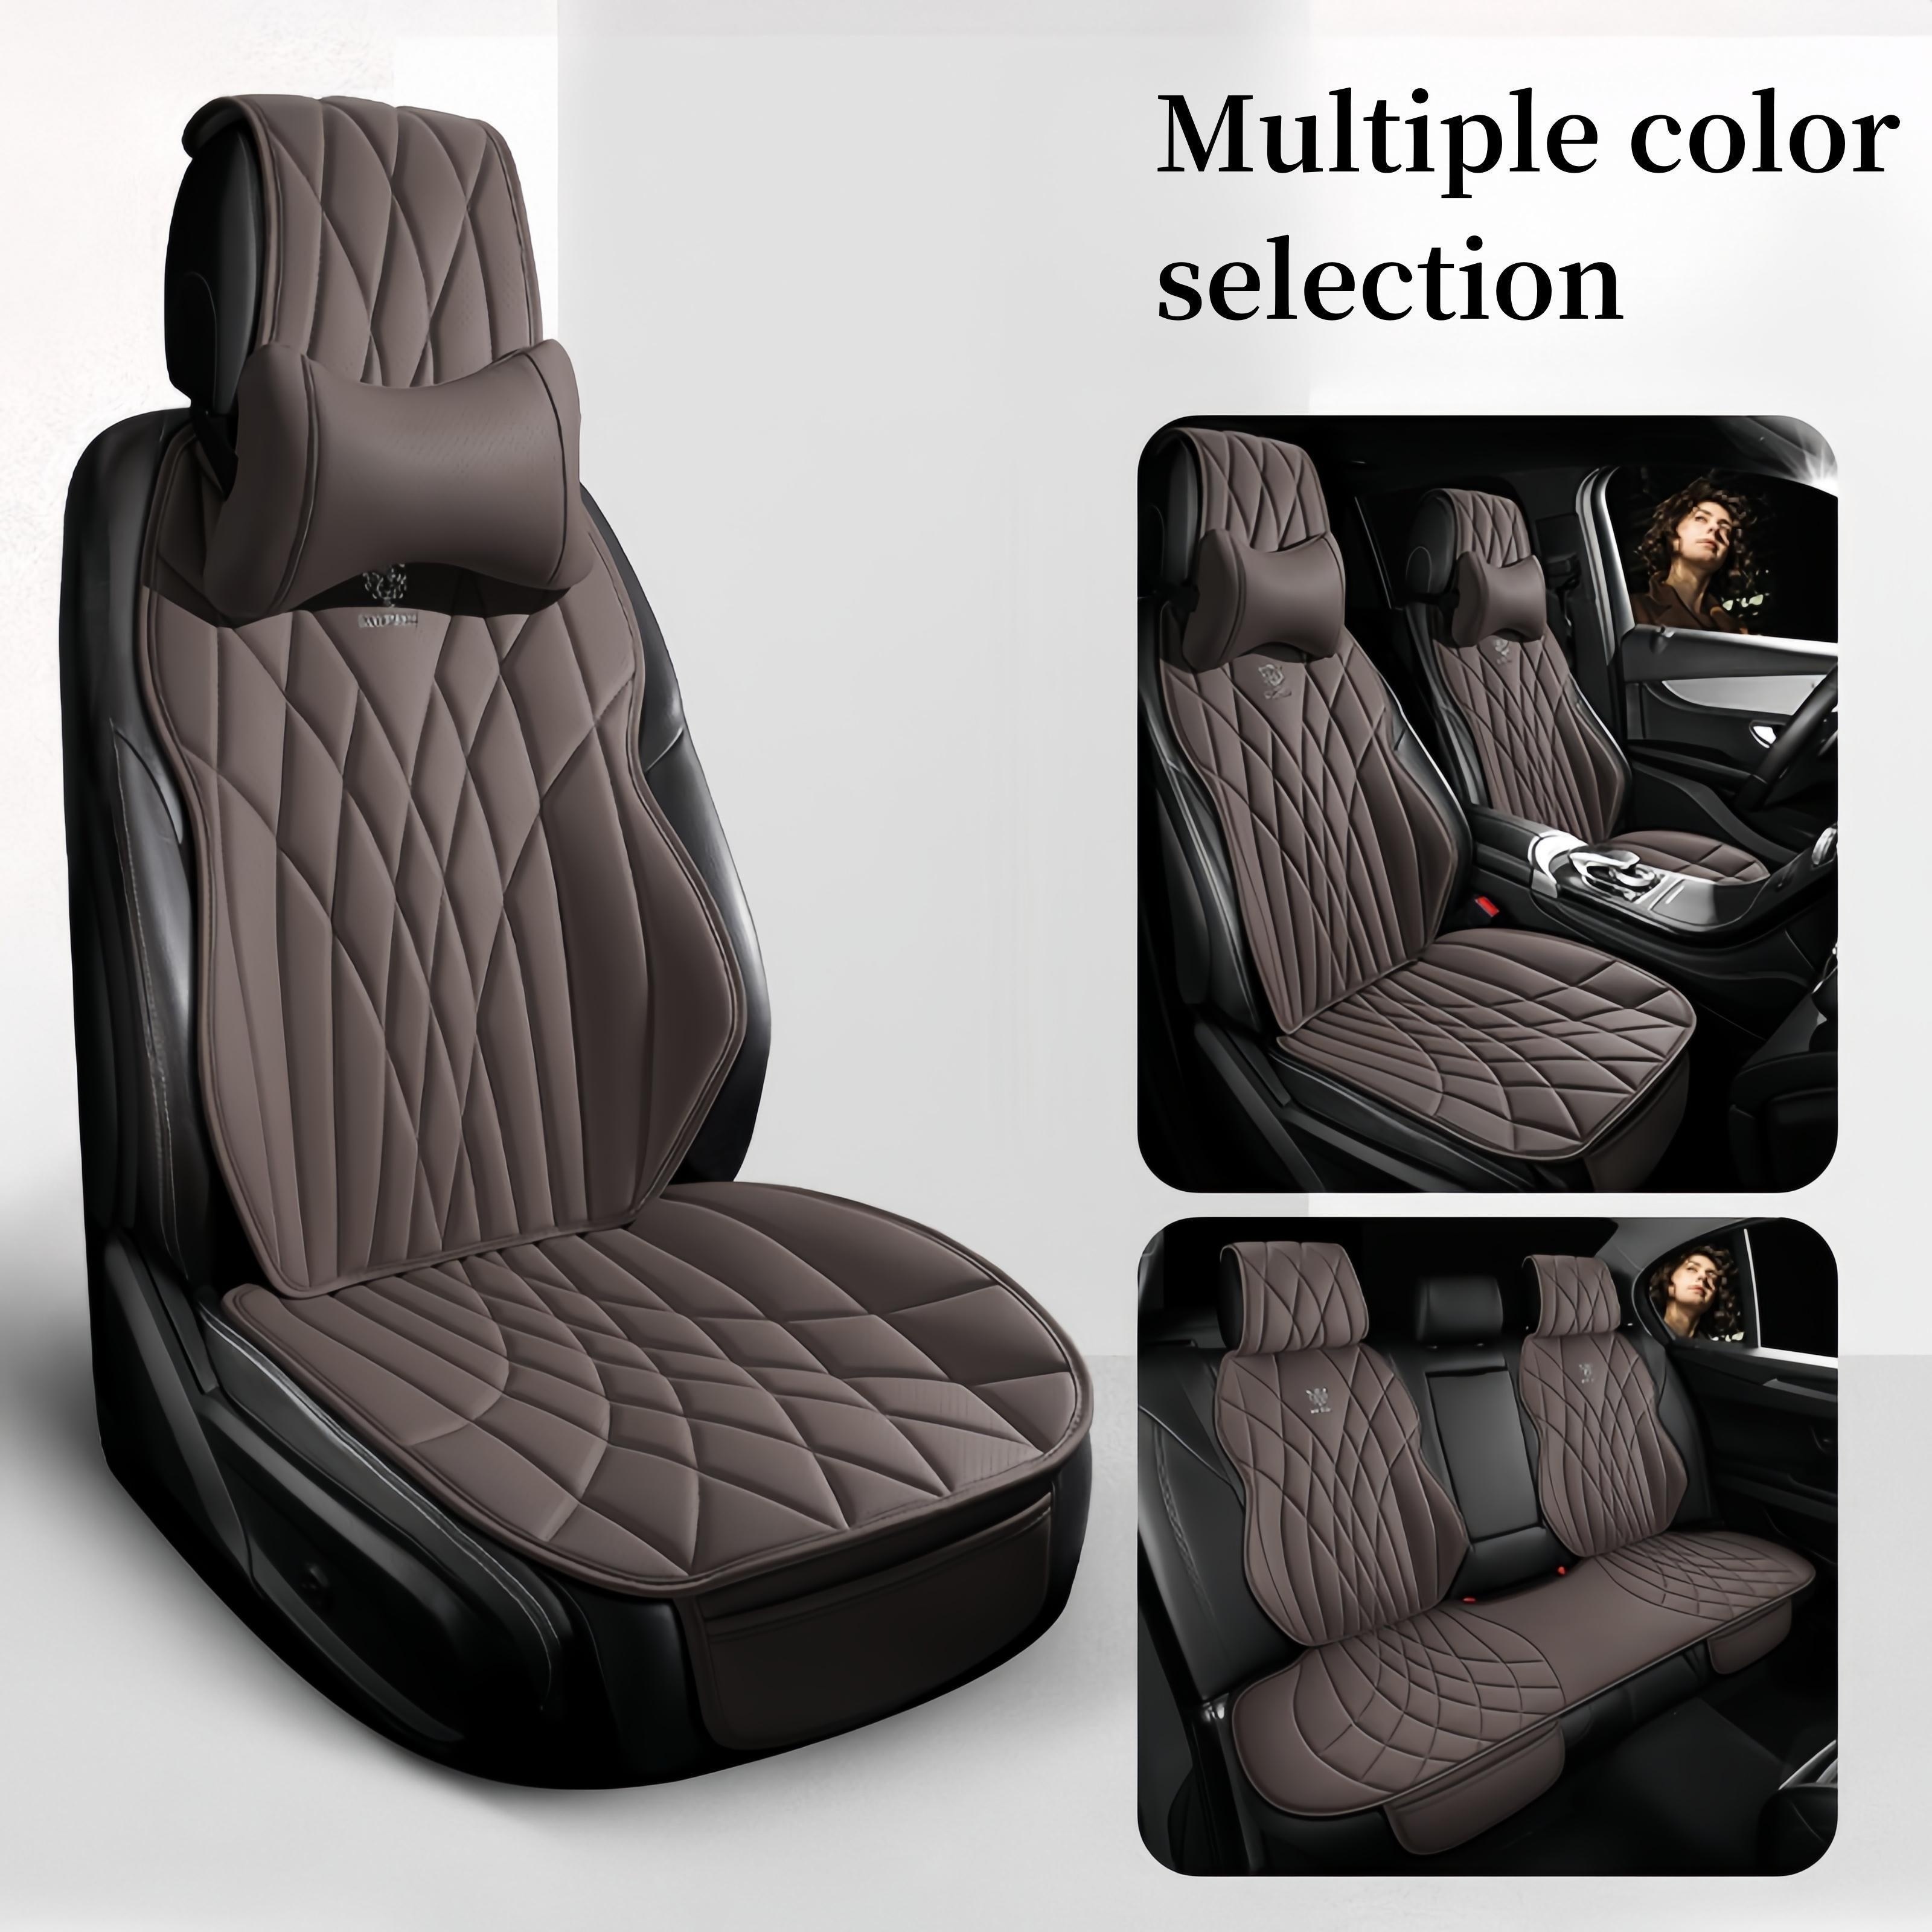 

5 Seats Full Car Full Covered Premium Pu Leather Seat Protector Universal Car Seat Covers To Increase Your Car Comfort Shipping